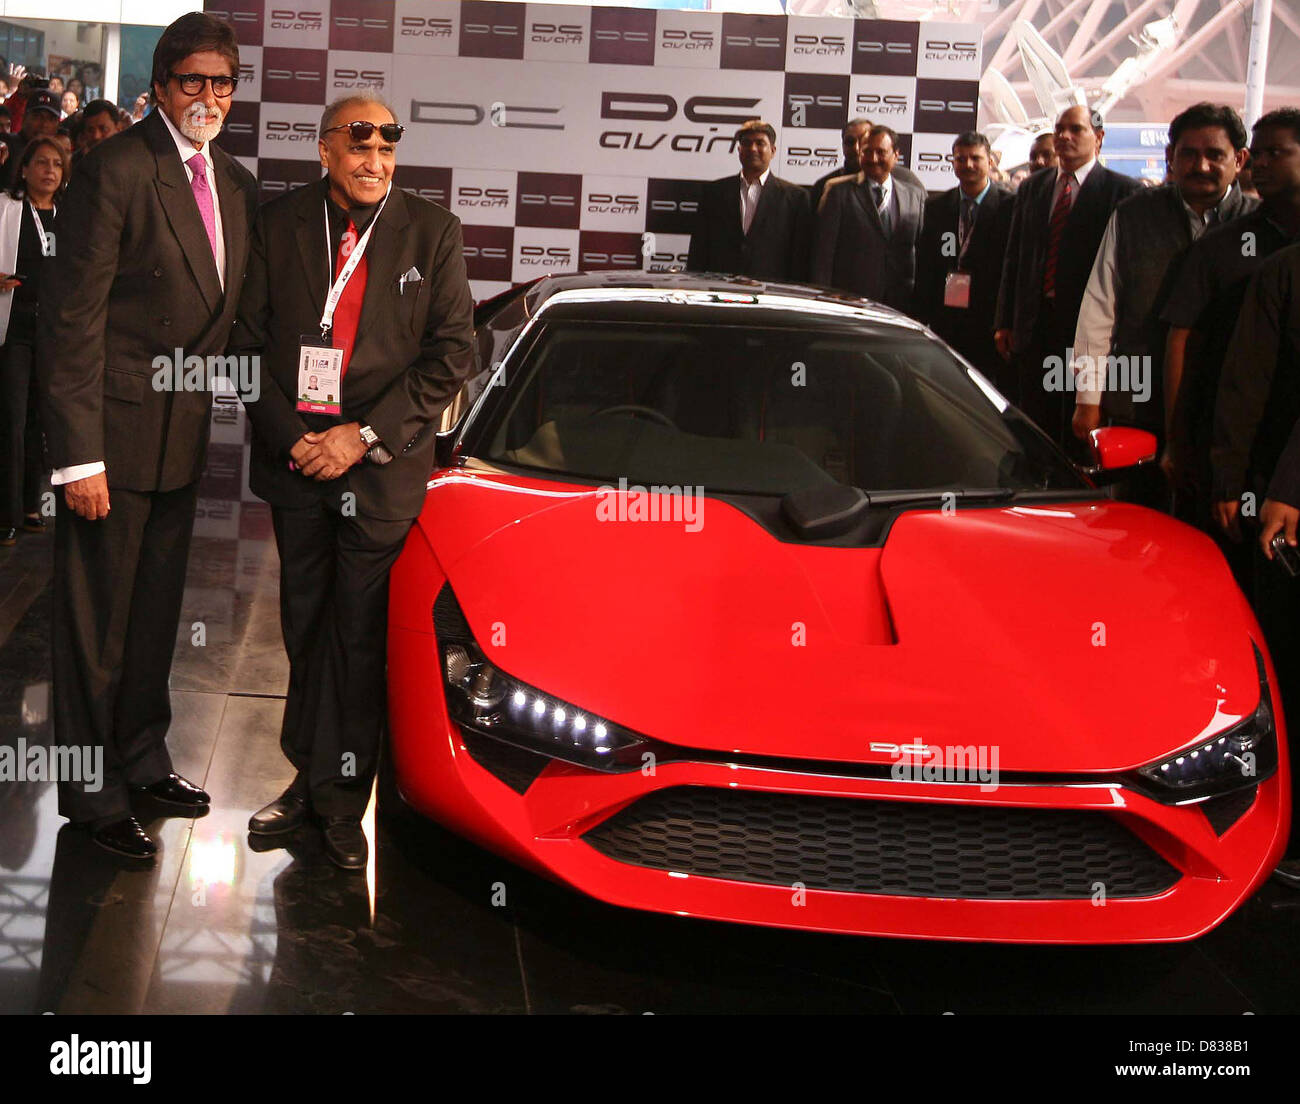 Bollywood actor Amitabh Bhachchan with Dilip Chhabria Auto Expo in New Delhi New Delhi, India - 05.01.12 Stock Photo